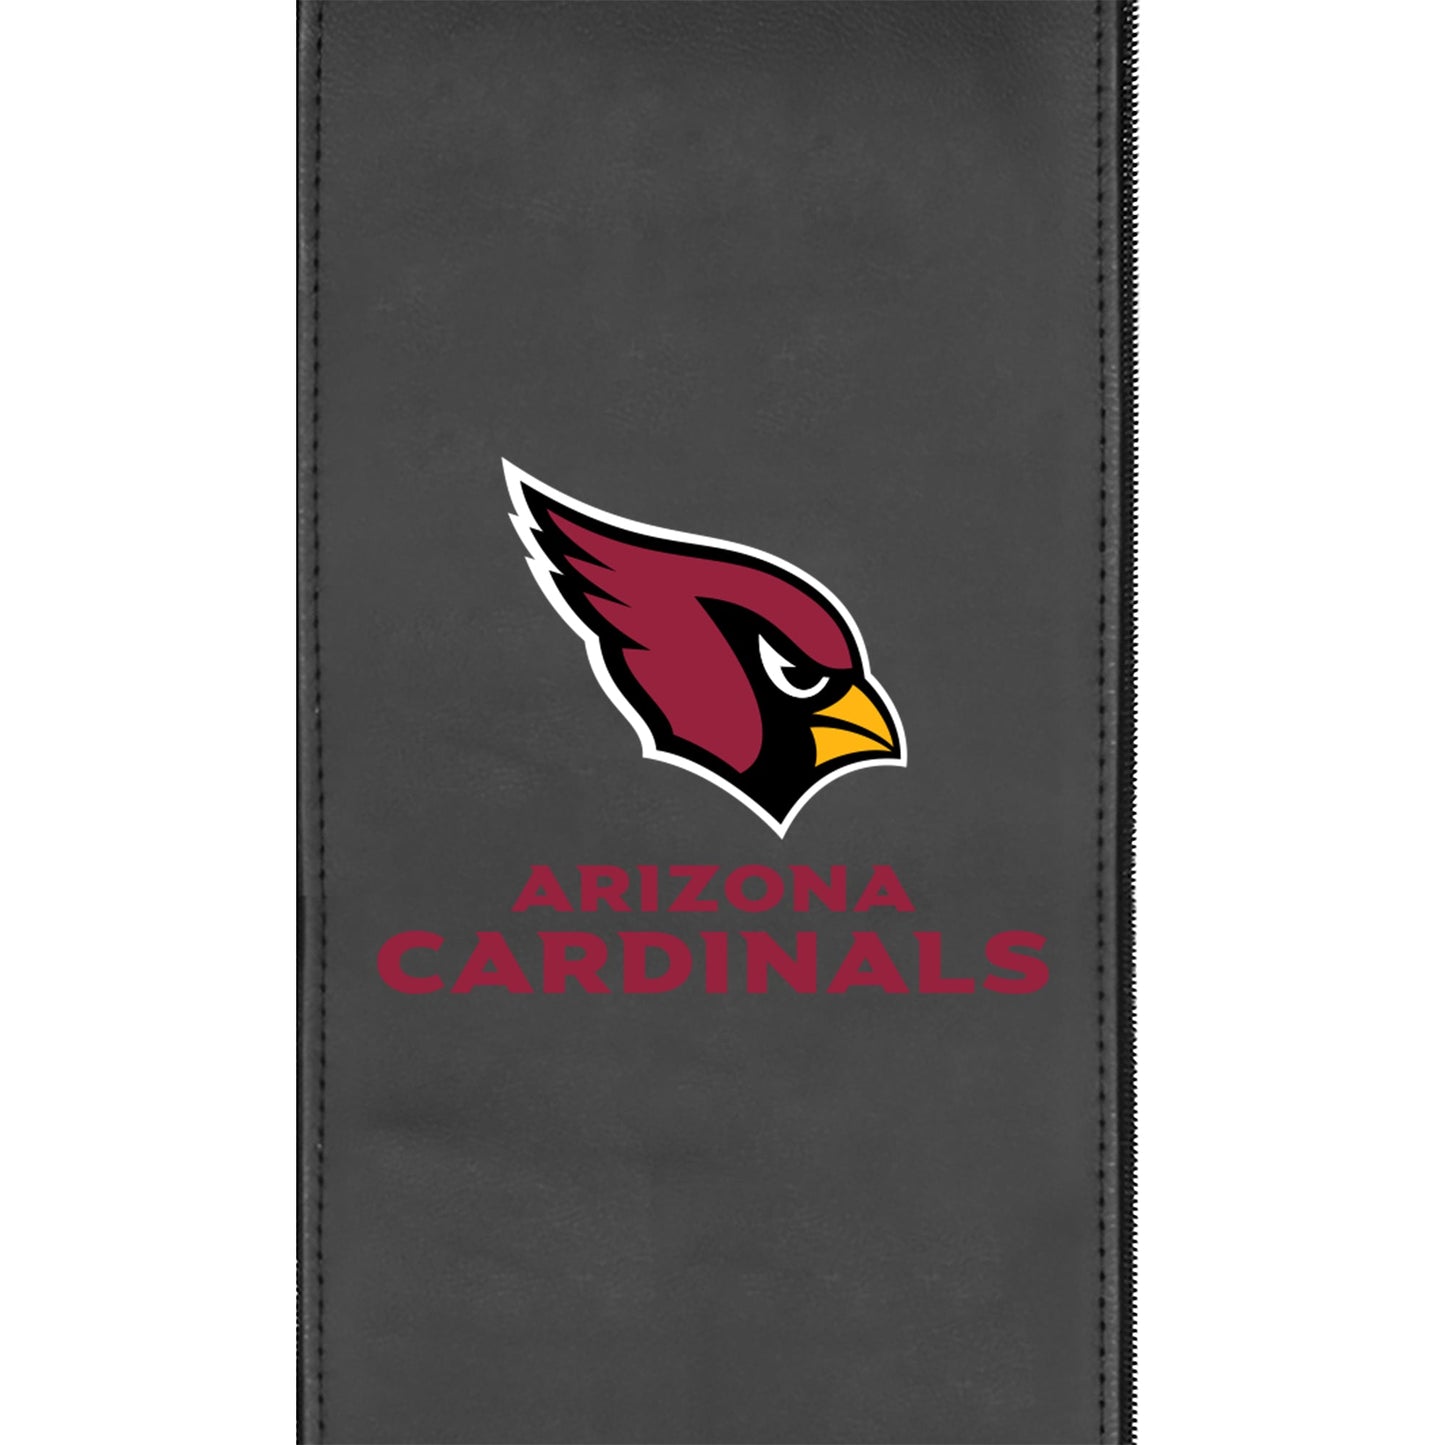 Relax Home Theater Recliner with Arizona Cardinals Secondary Logo